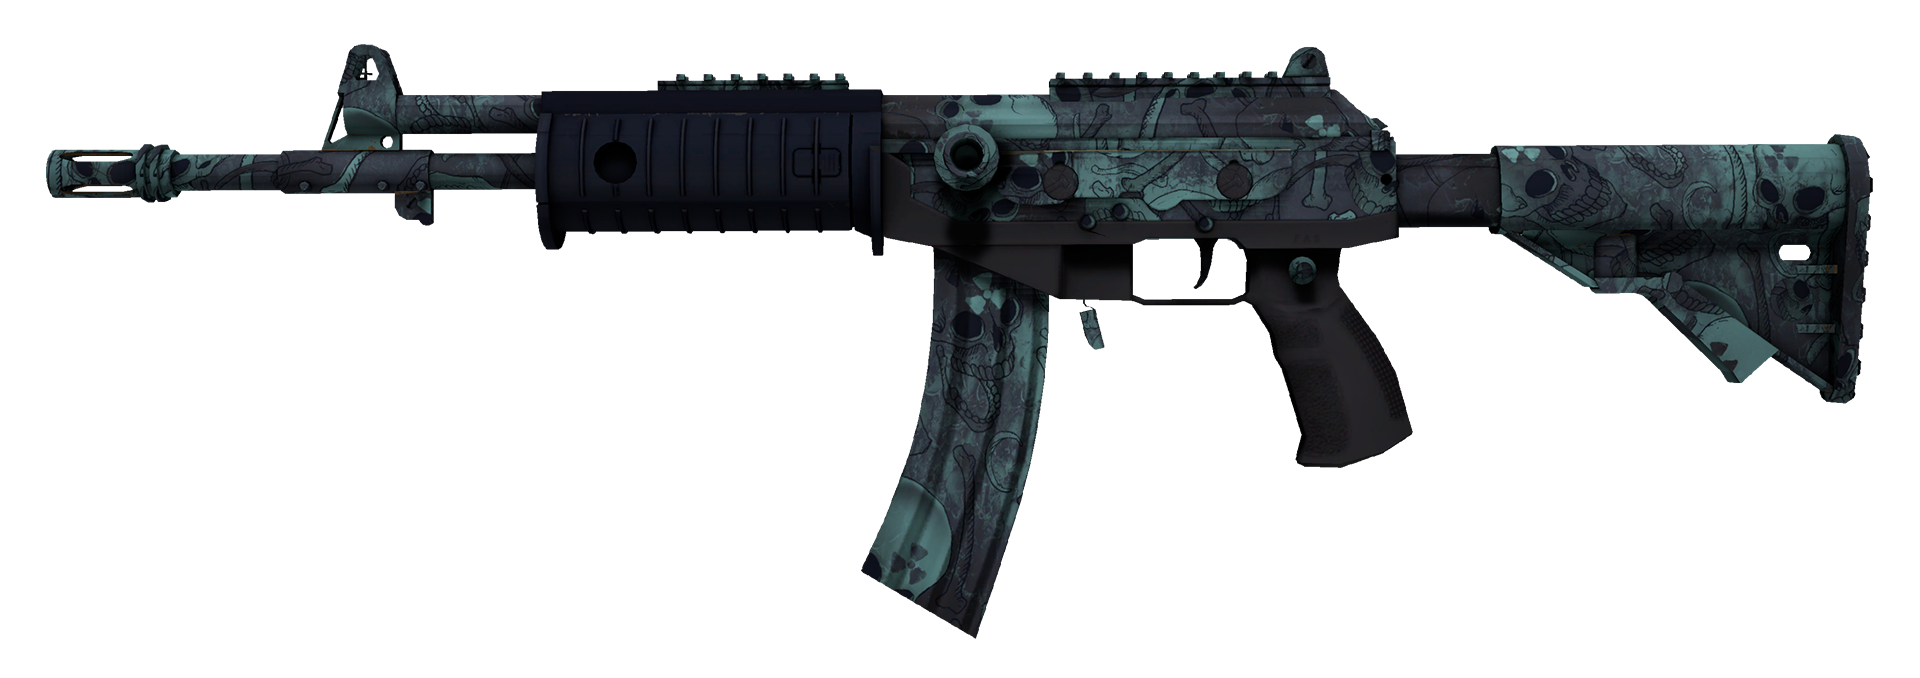 Galil AR Cold Fusion Large Rendering